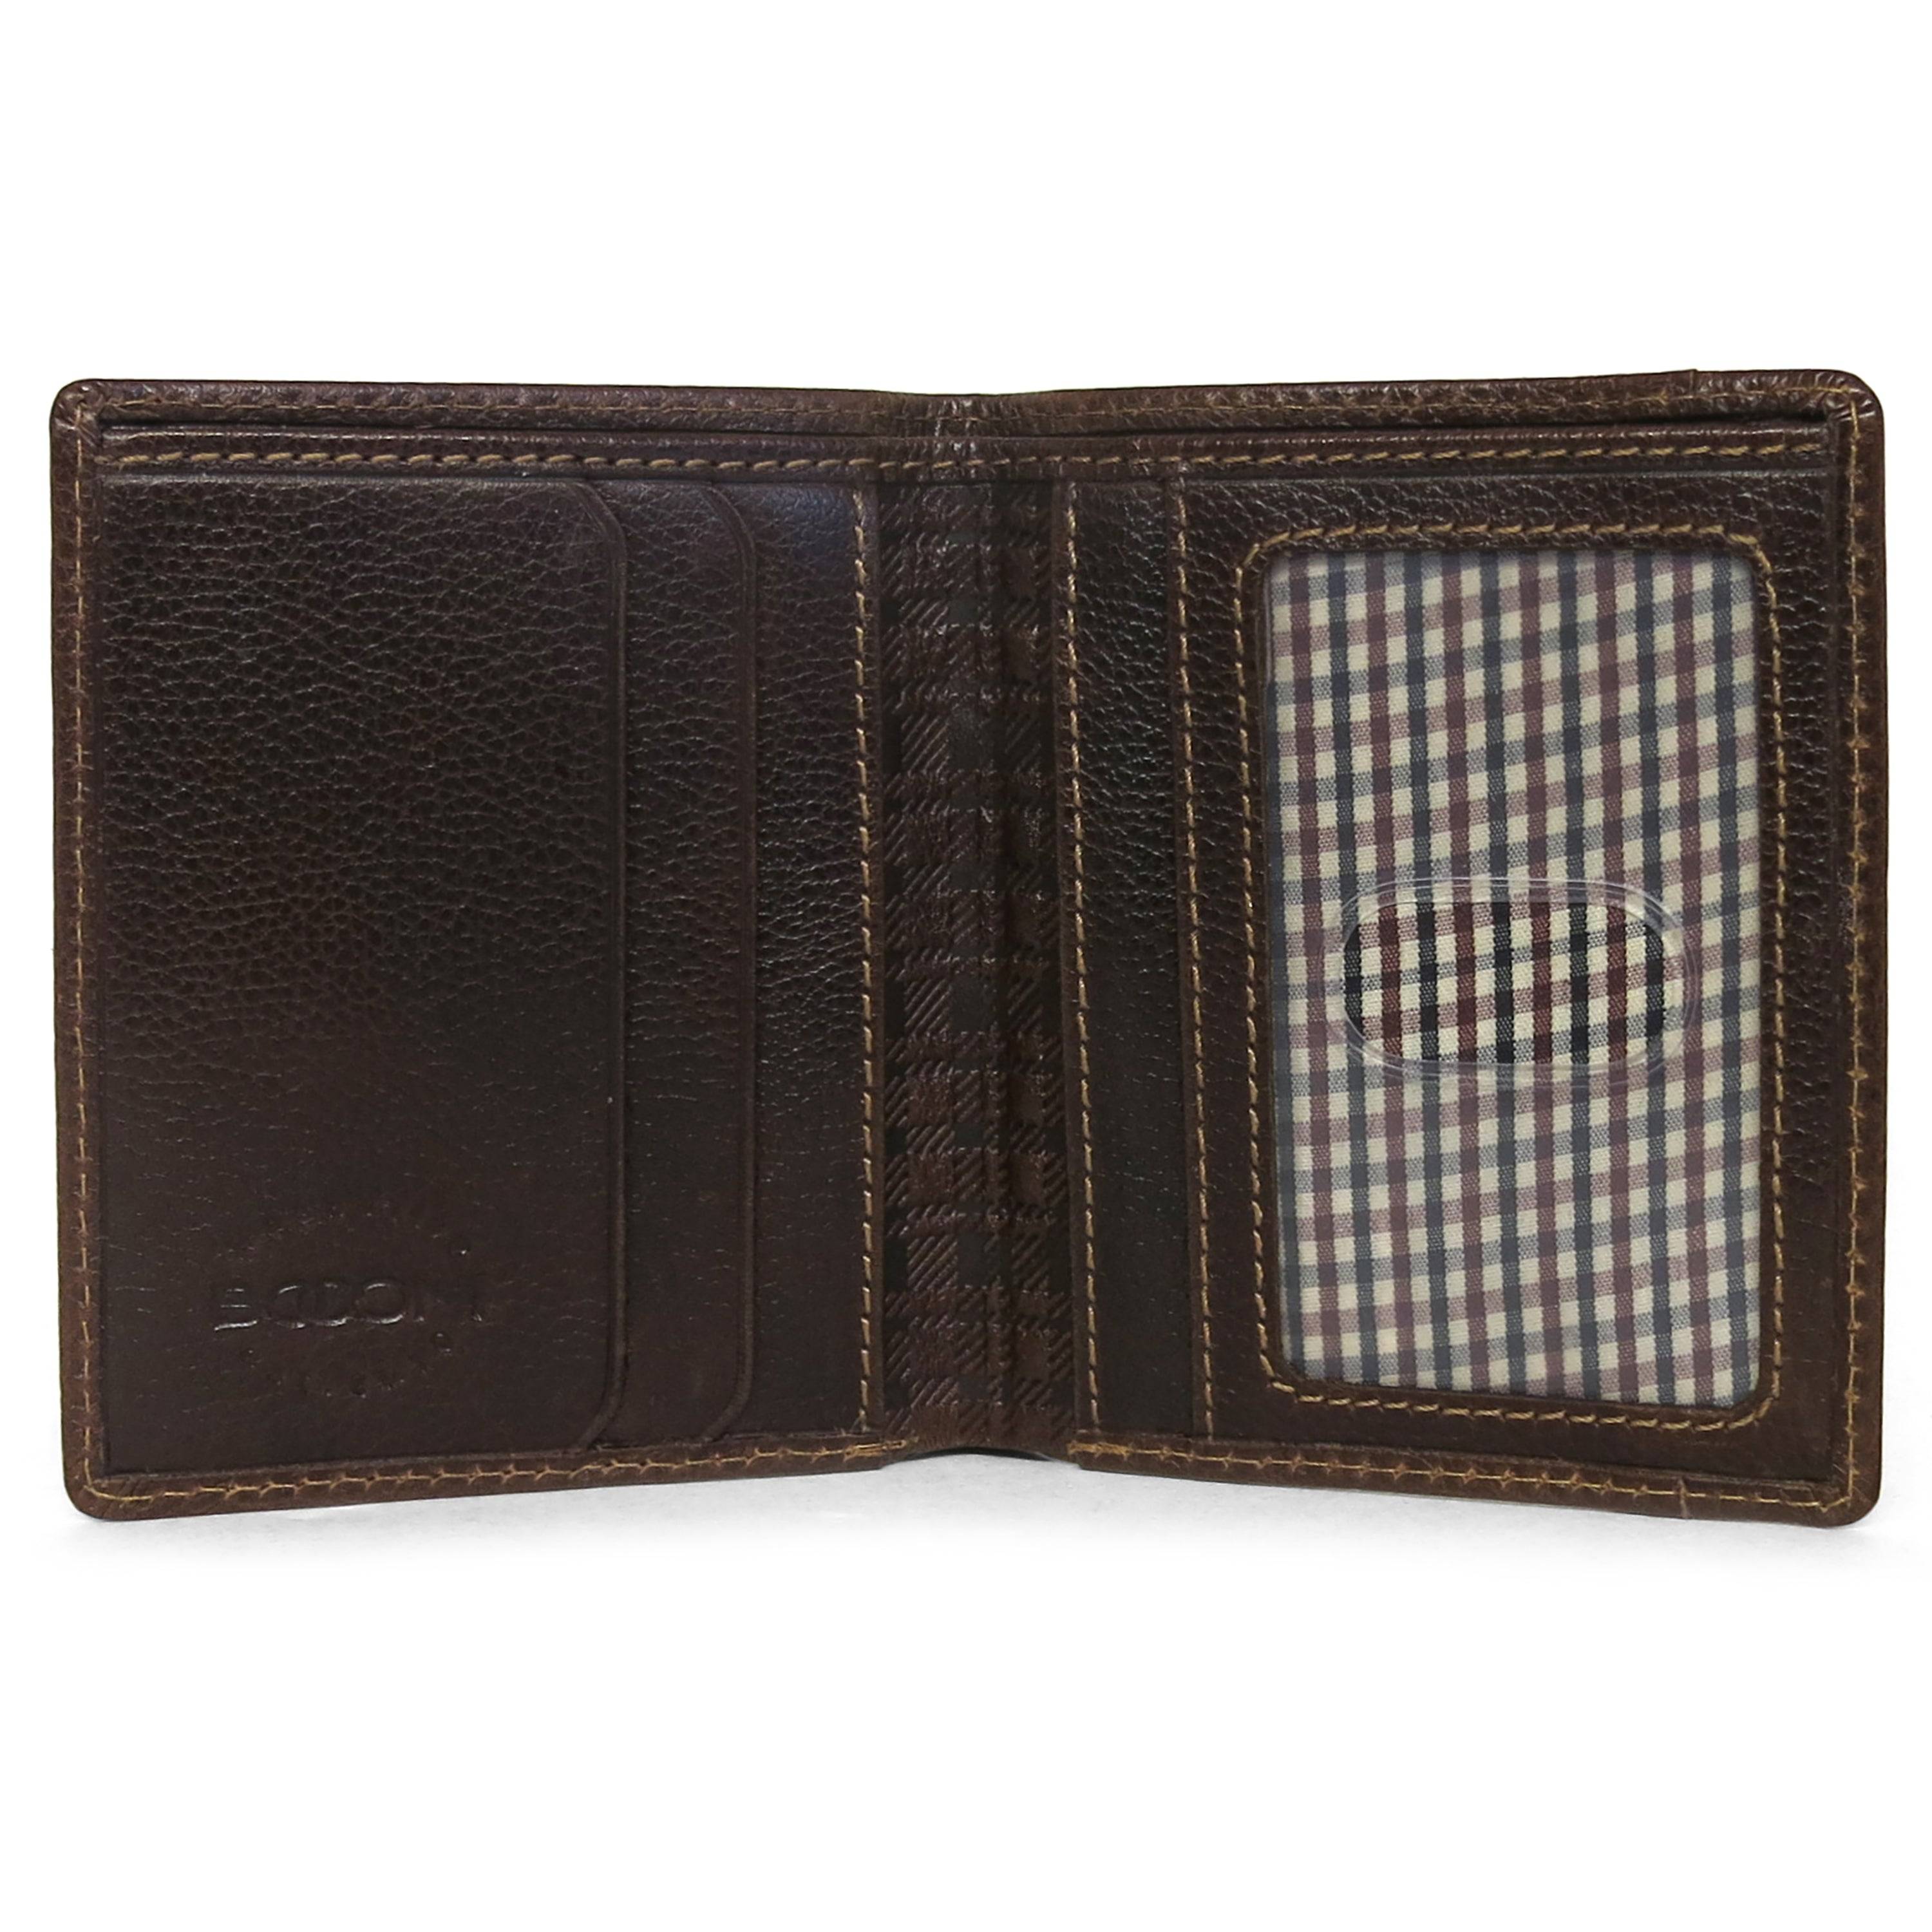 Hendrix Compact Leather Wallet